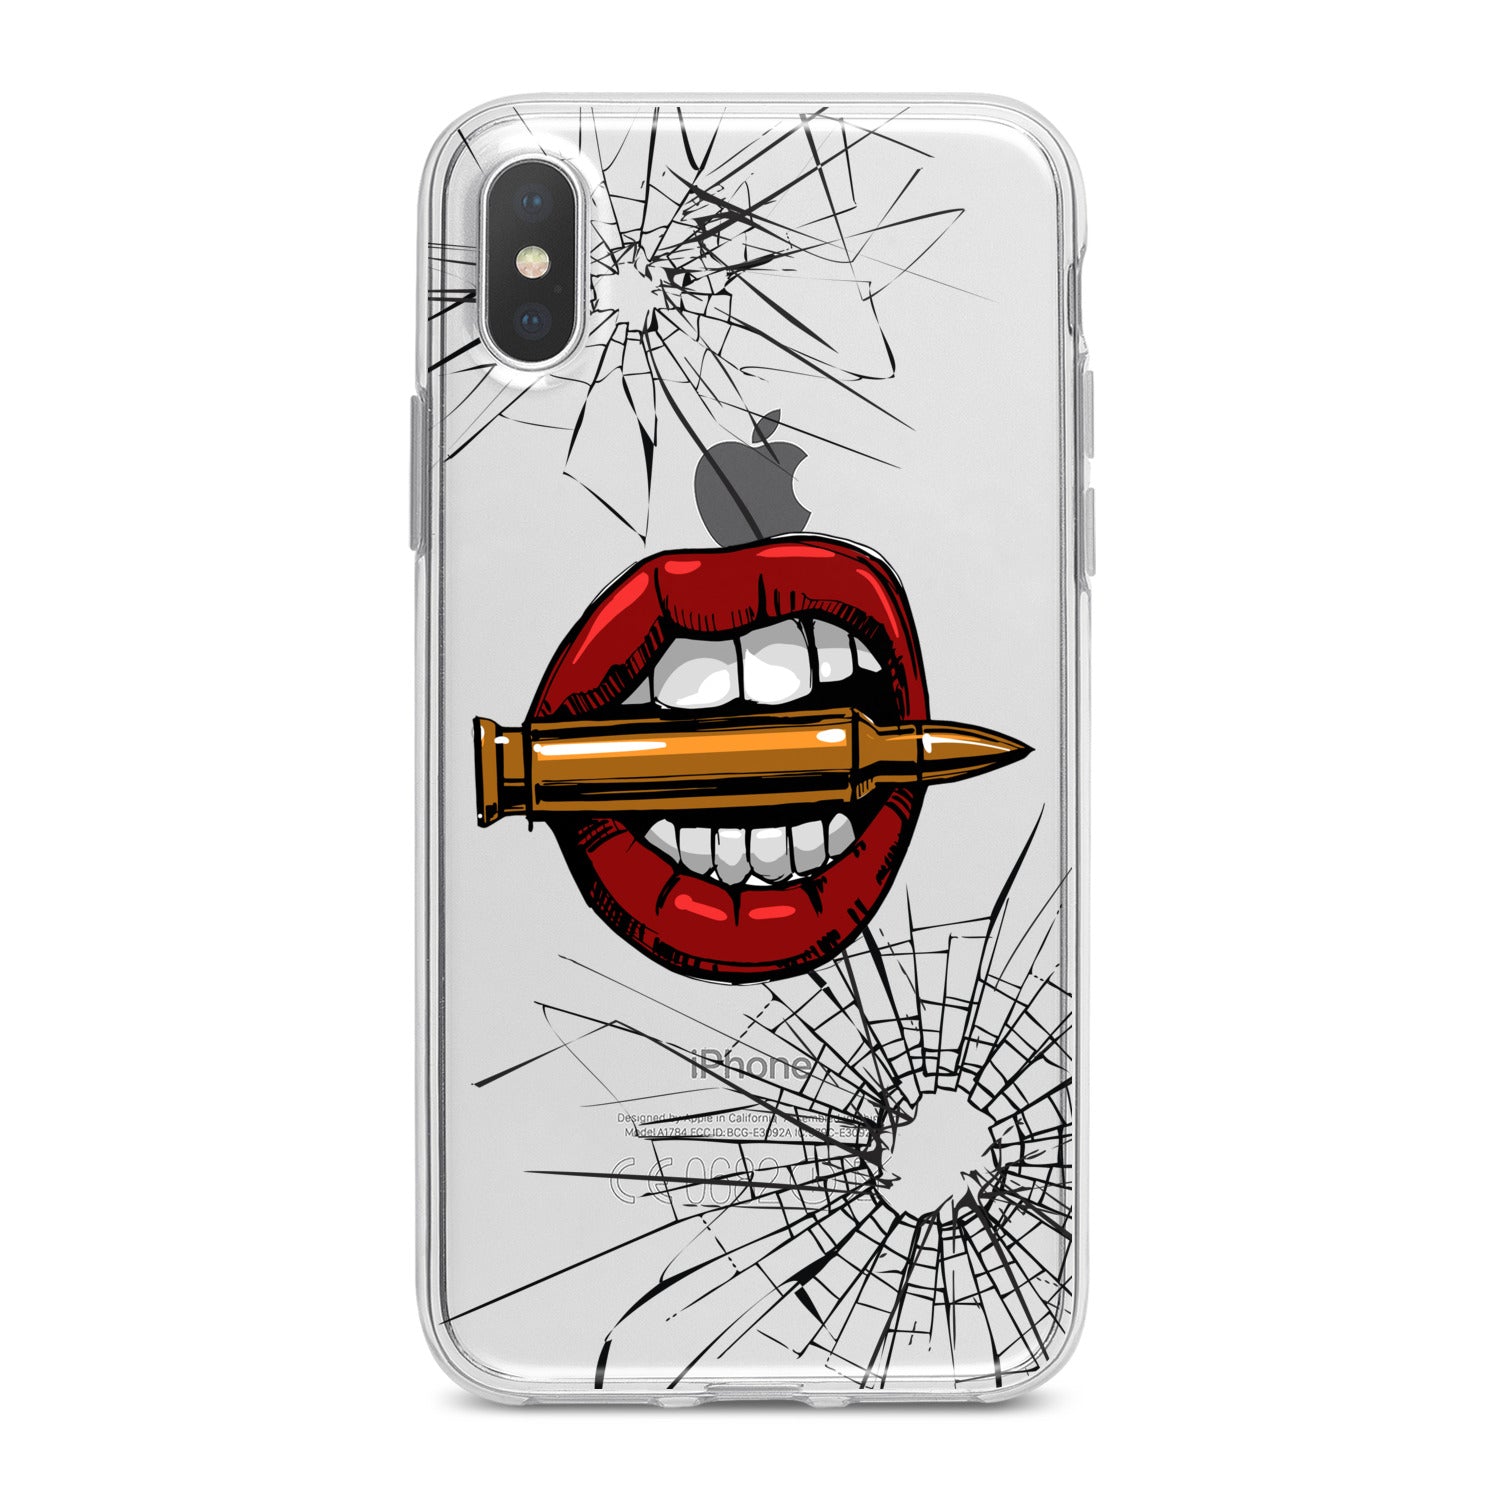 Lex Altern Red Lips Phone Case for your iPhone & Android phone.